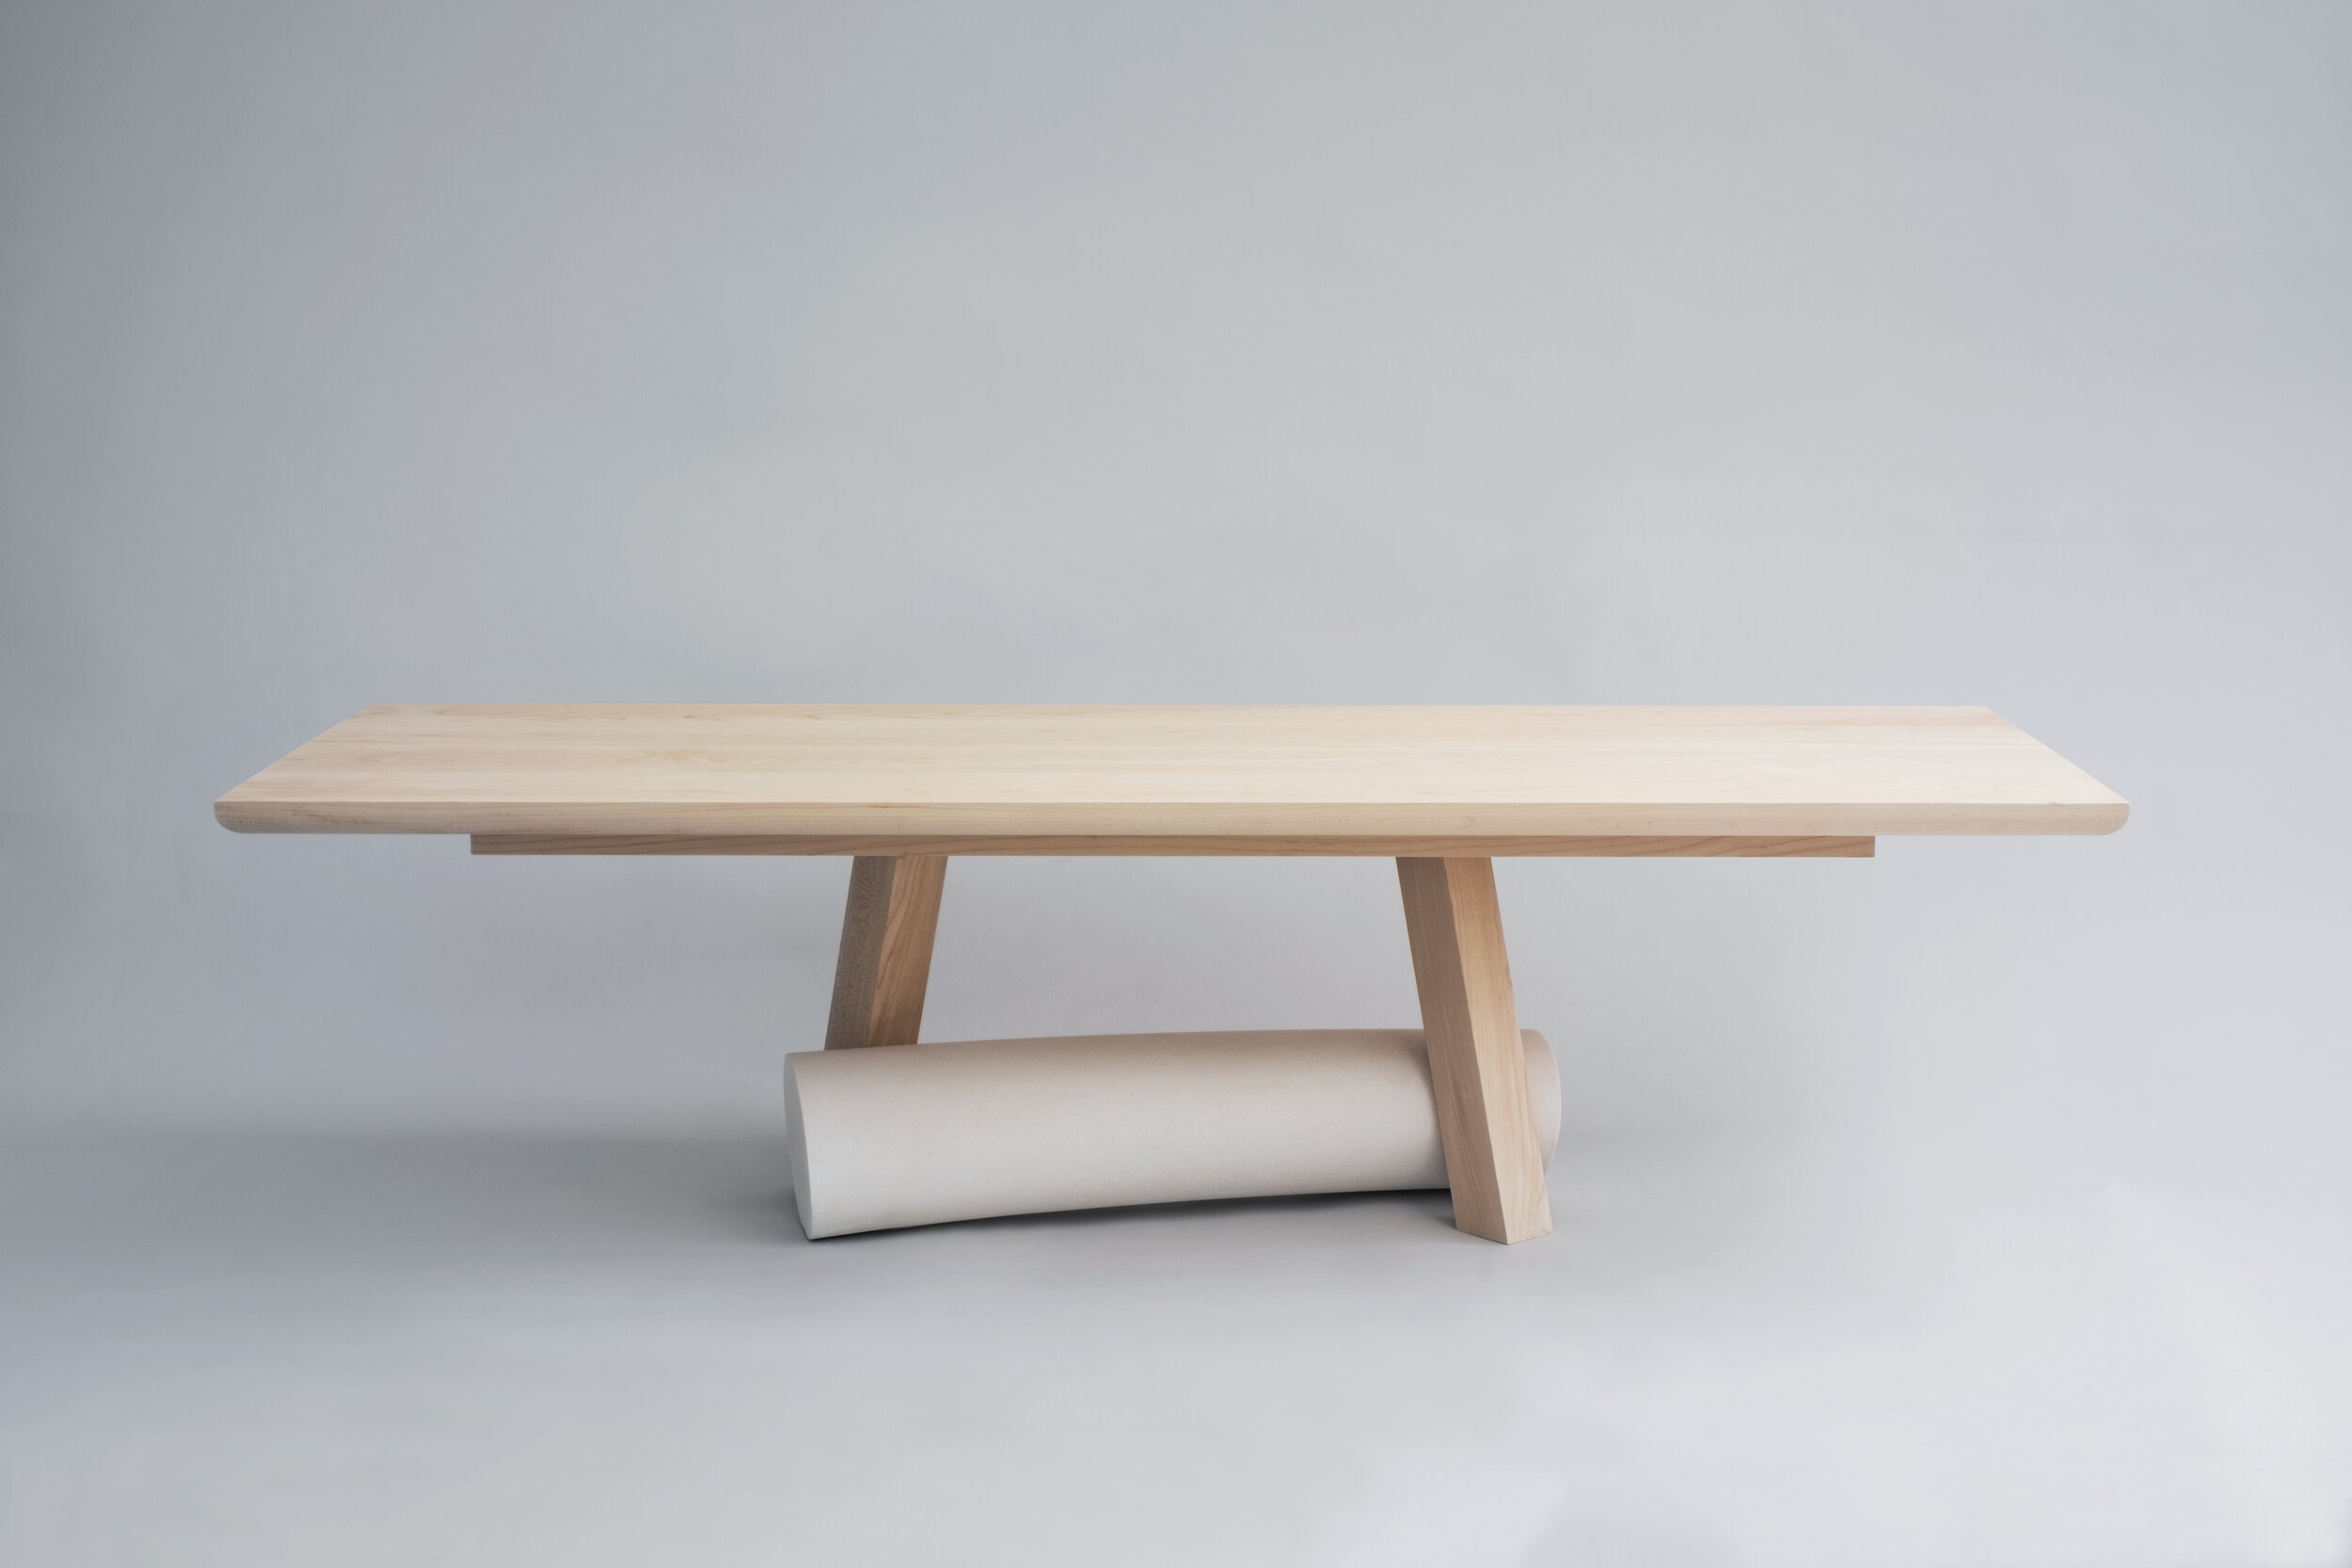 Poise-Maple-CoffeeTable-Front-2.jpg